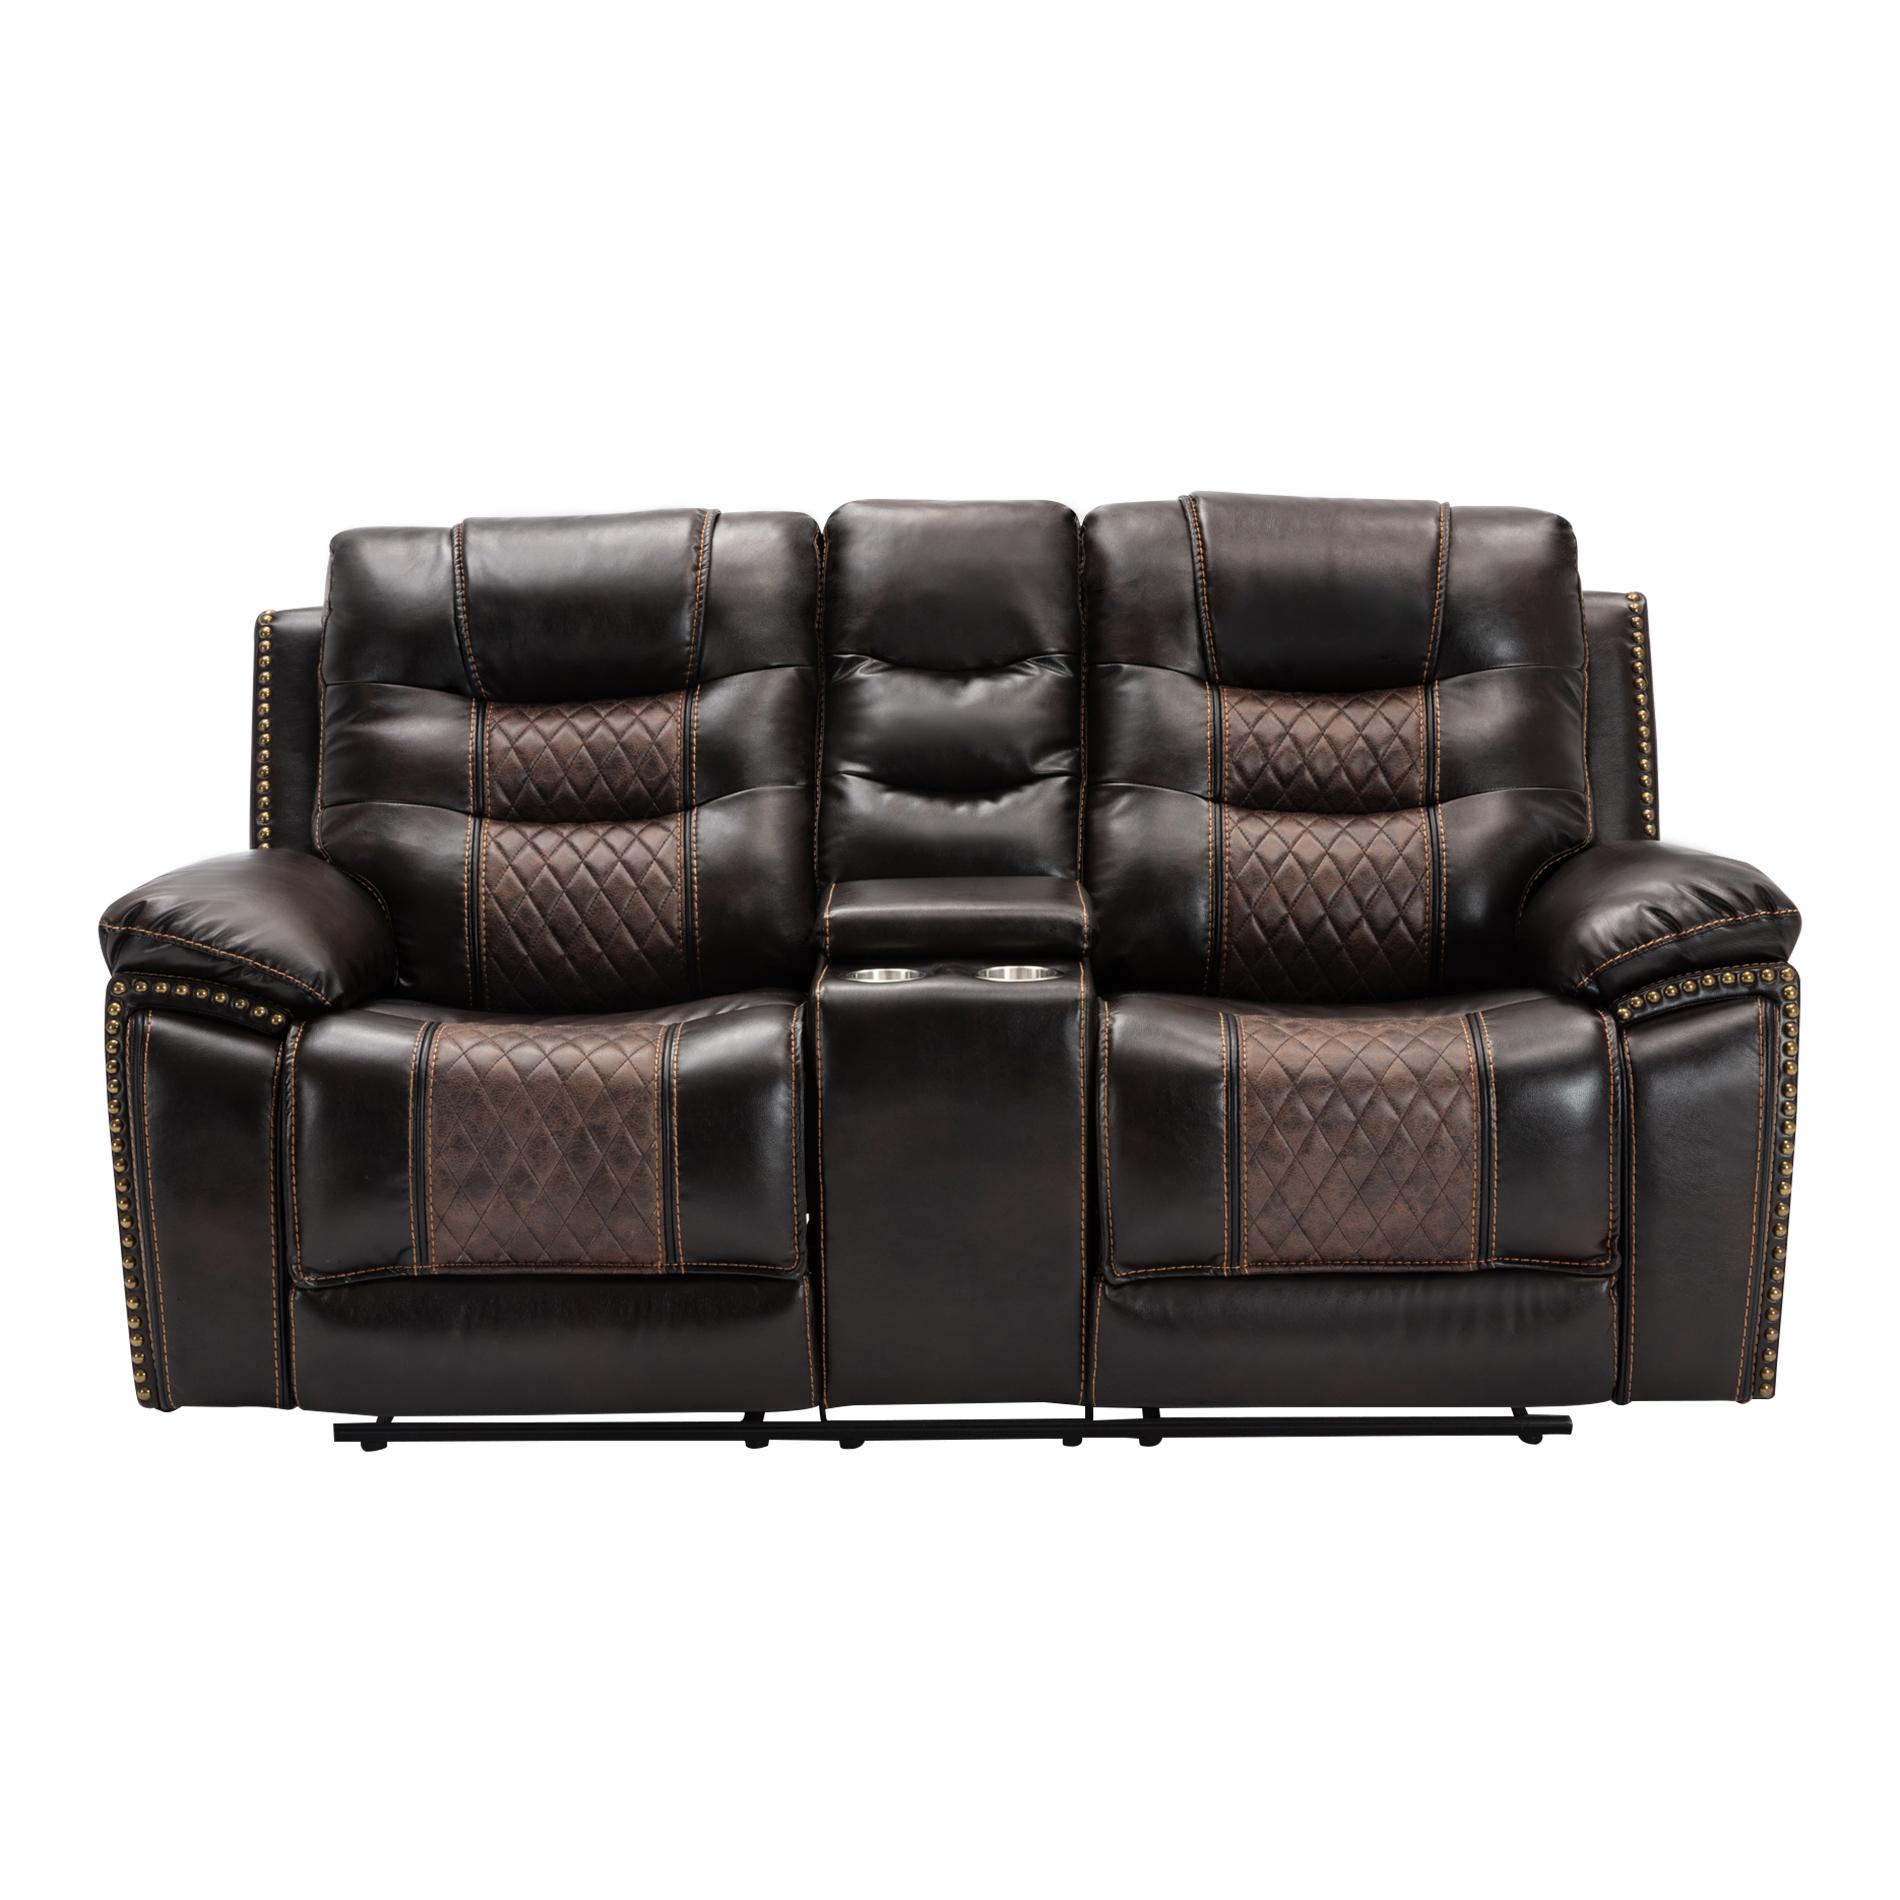 Dual Reclining PU Fabric Sofa and Love Seat in Dark Brown Two Tone Color